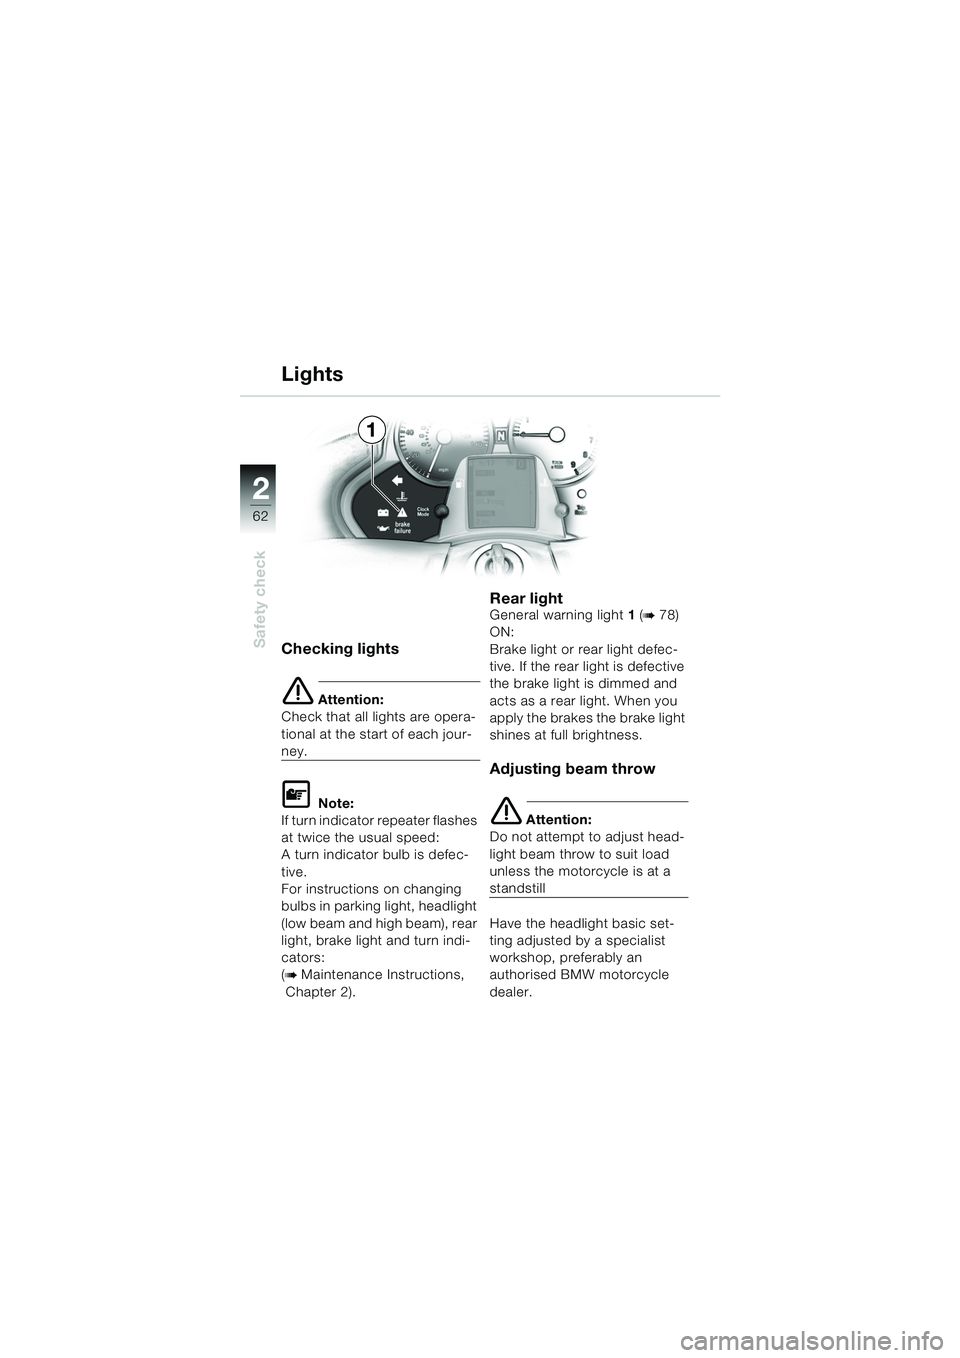 BMW MOTORRAD K 1200 LT 2005  Riders Manual (in English) 62
Safety check
2
Lights
Checking lights
e Attention:
Check that all lights are opera-
tional at the start of each jour-
ney.
L Note:
If turn indicator repeater flashes 
at twice the usual speed: 
A t